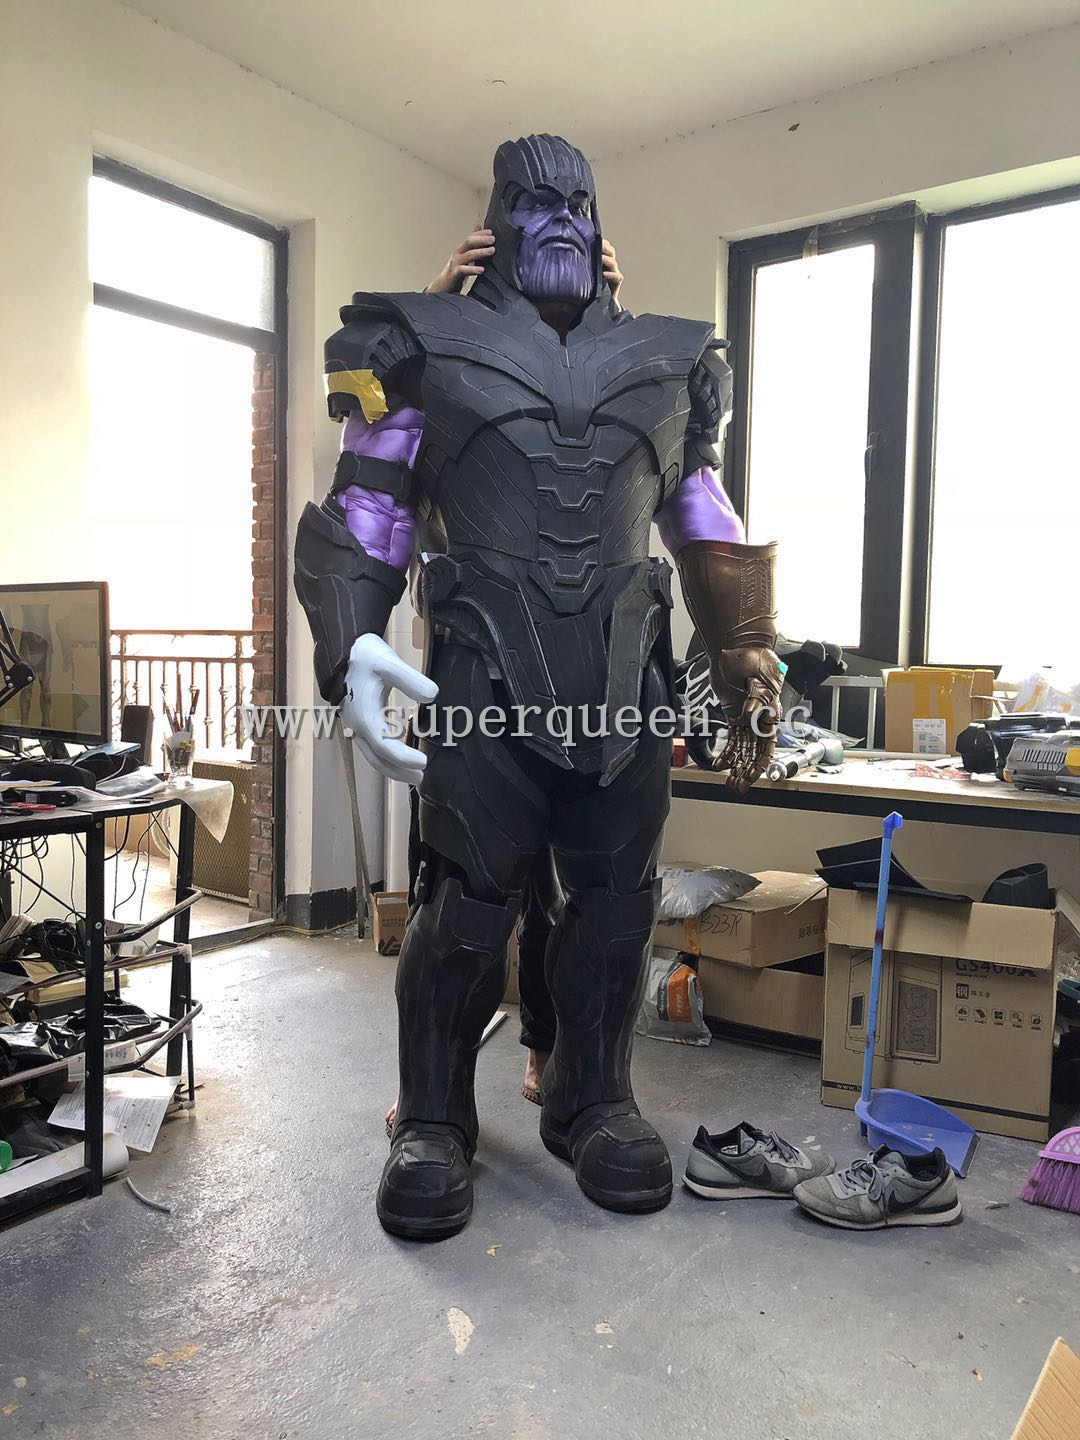 What kind of foam is used in armor cosplay?